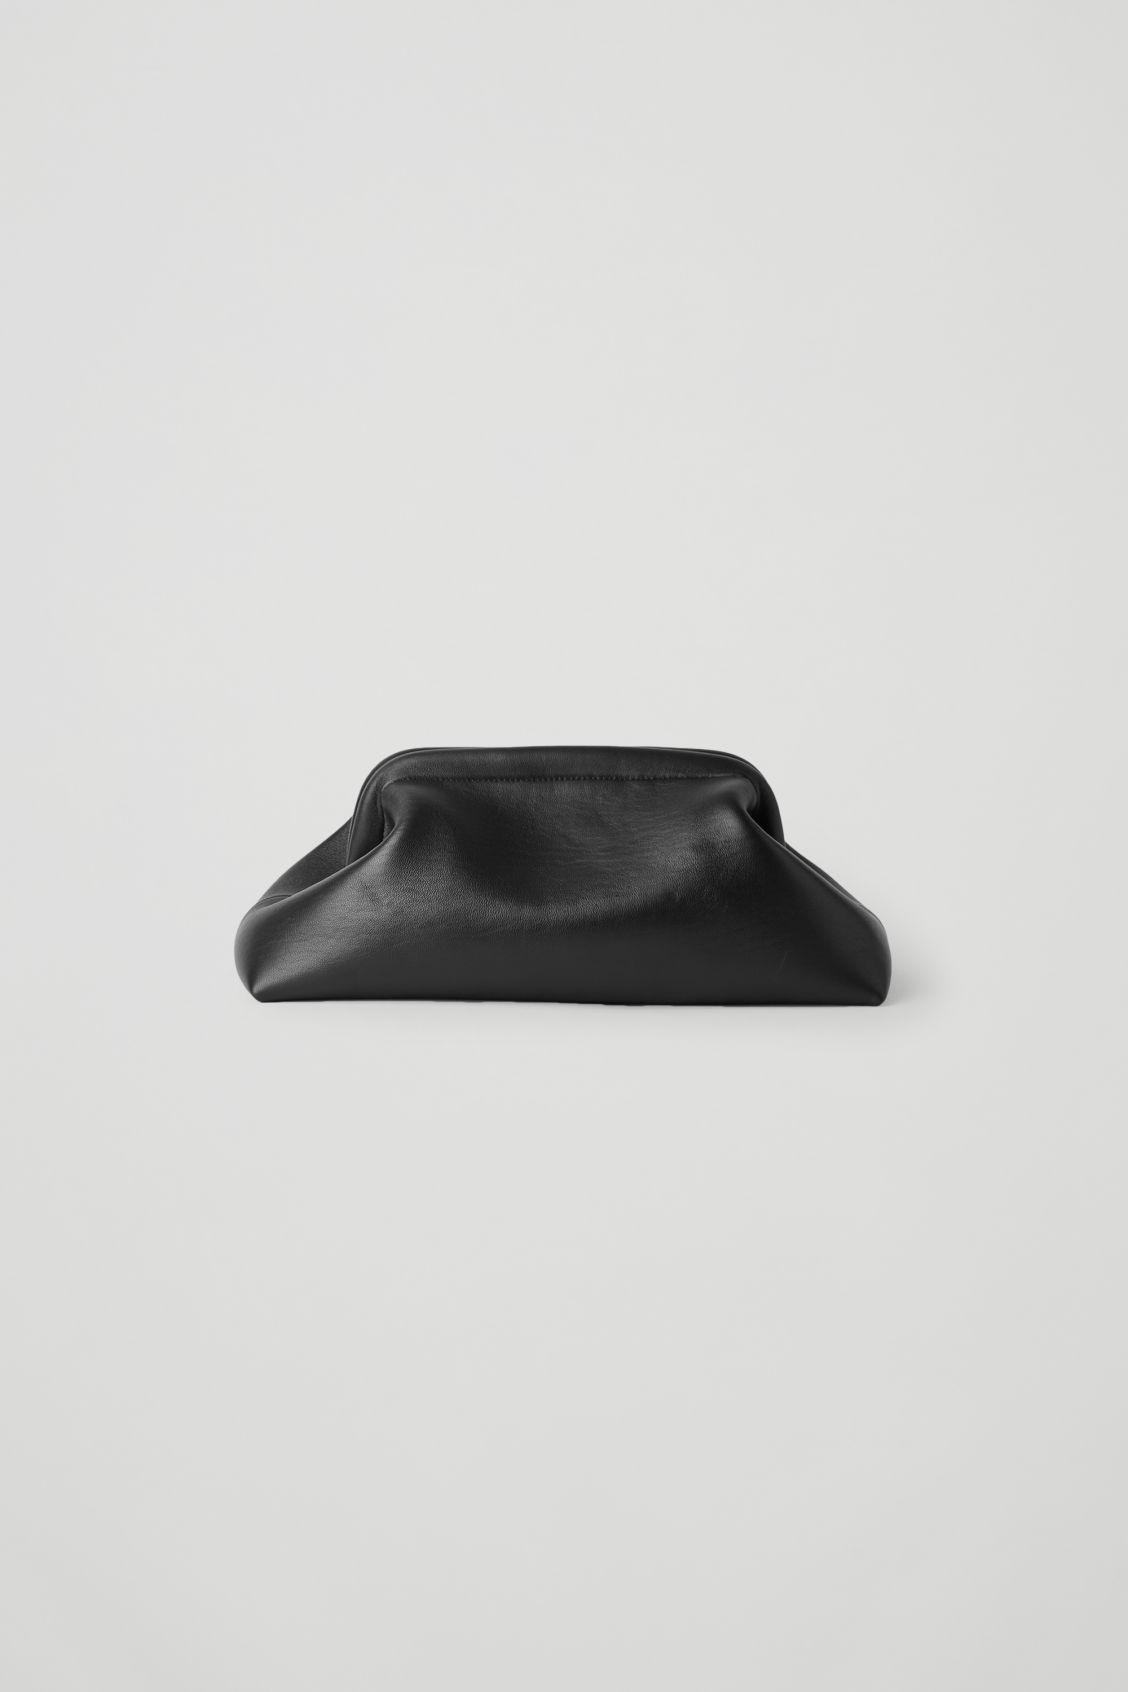 COS Large Leather Clutch Bag in Black | Lyst